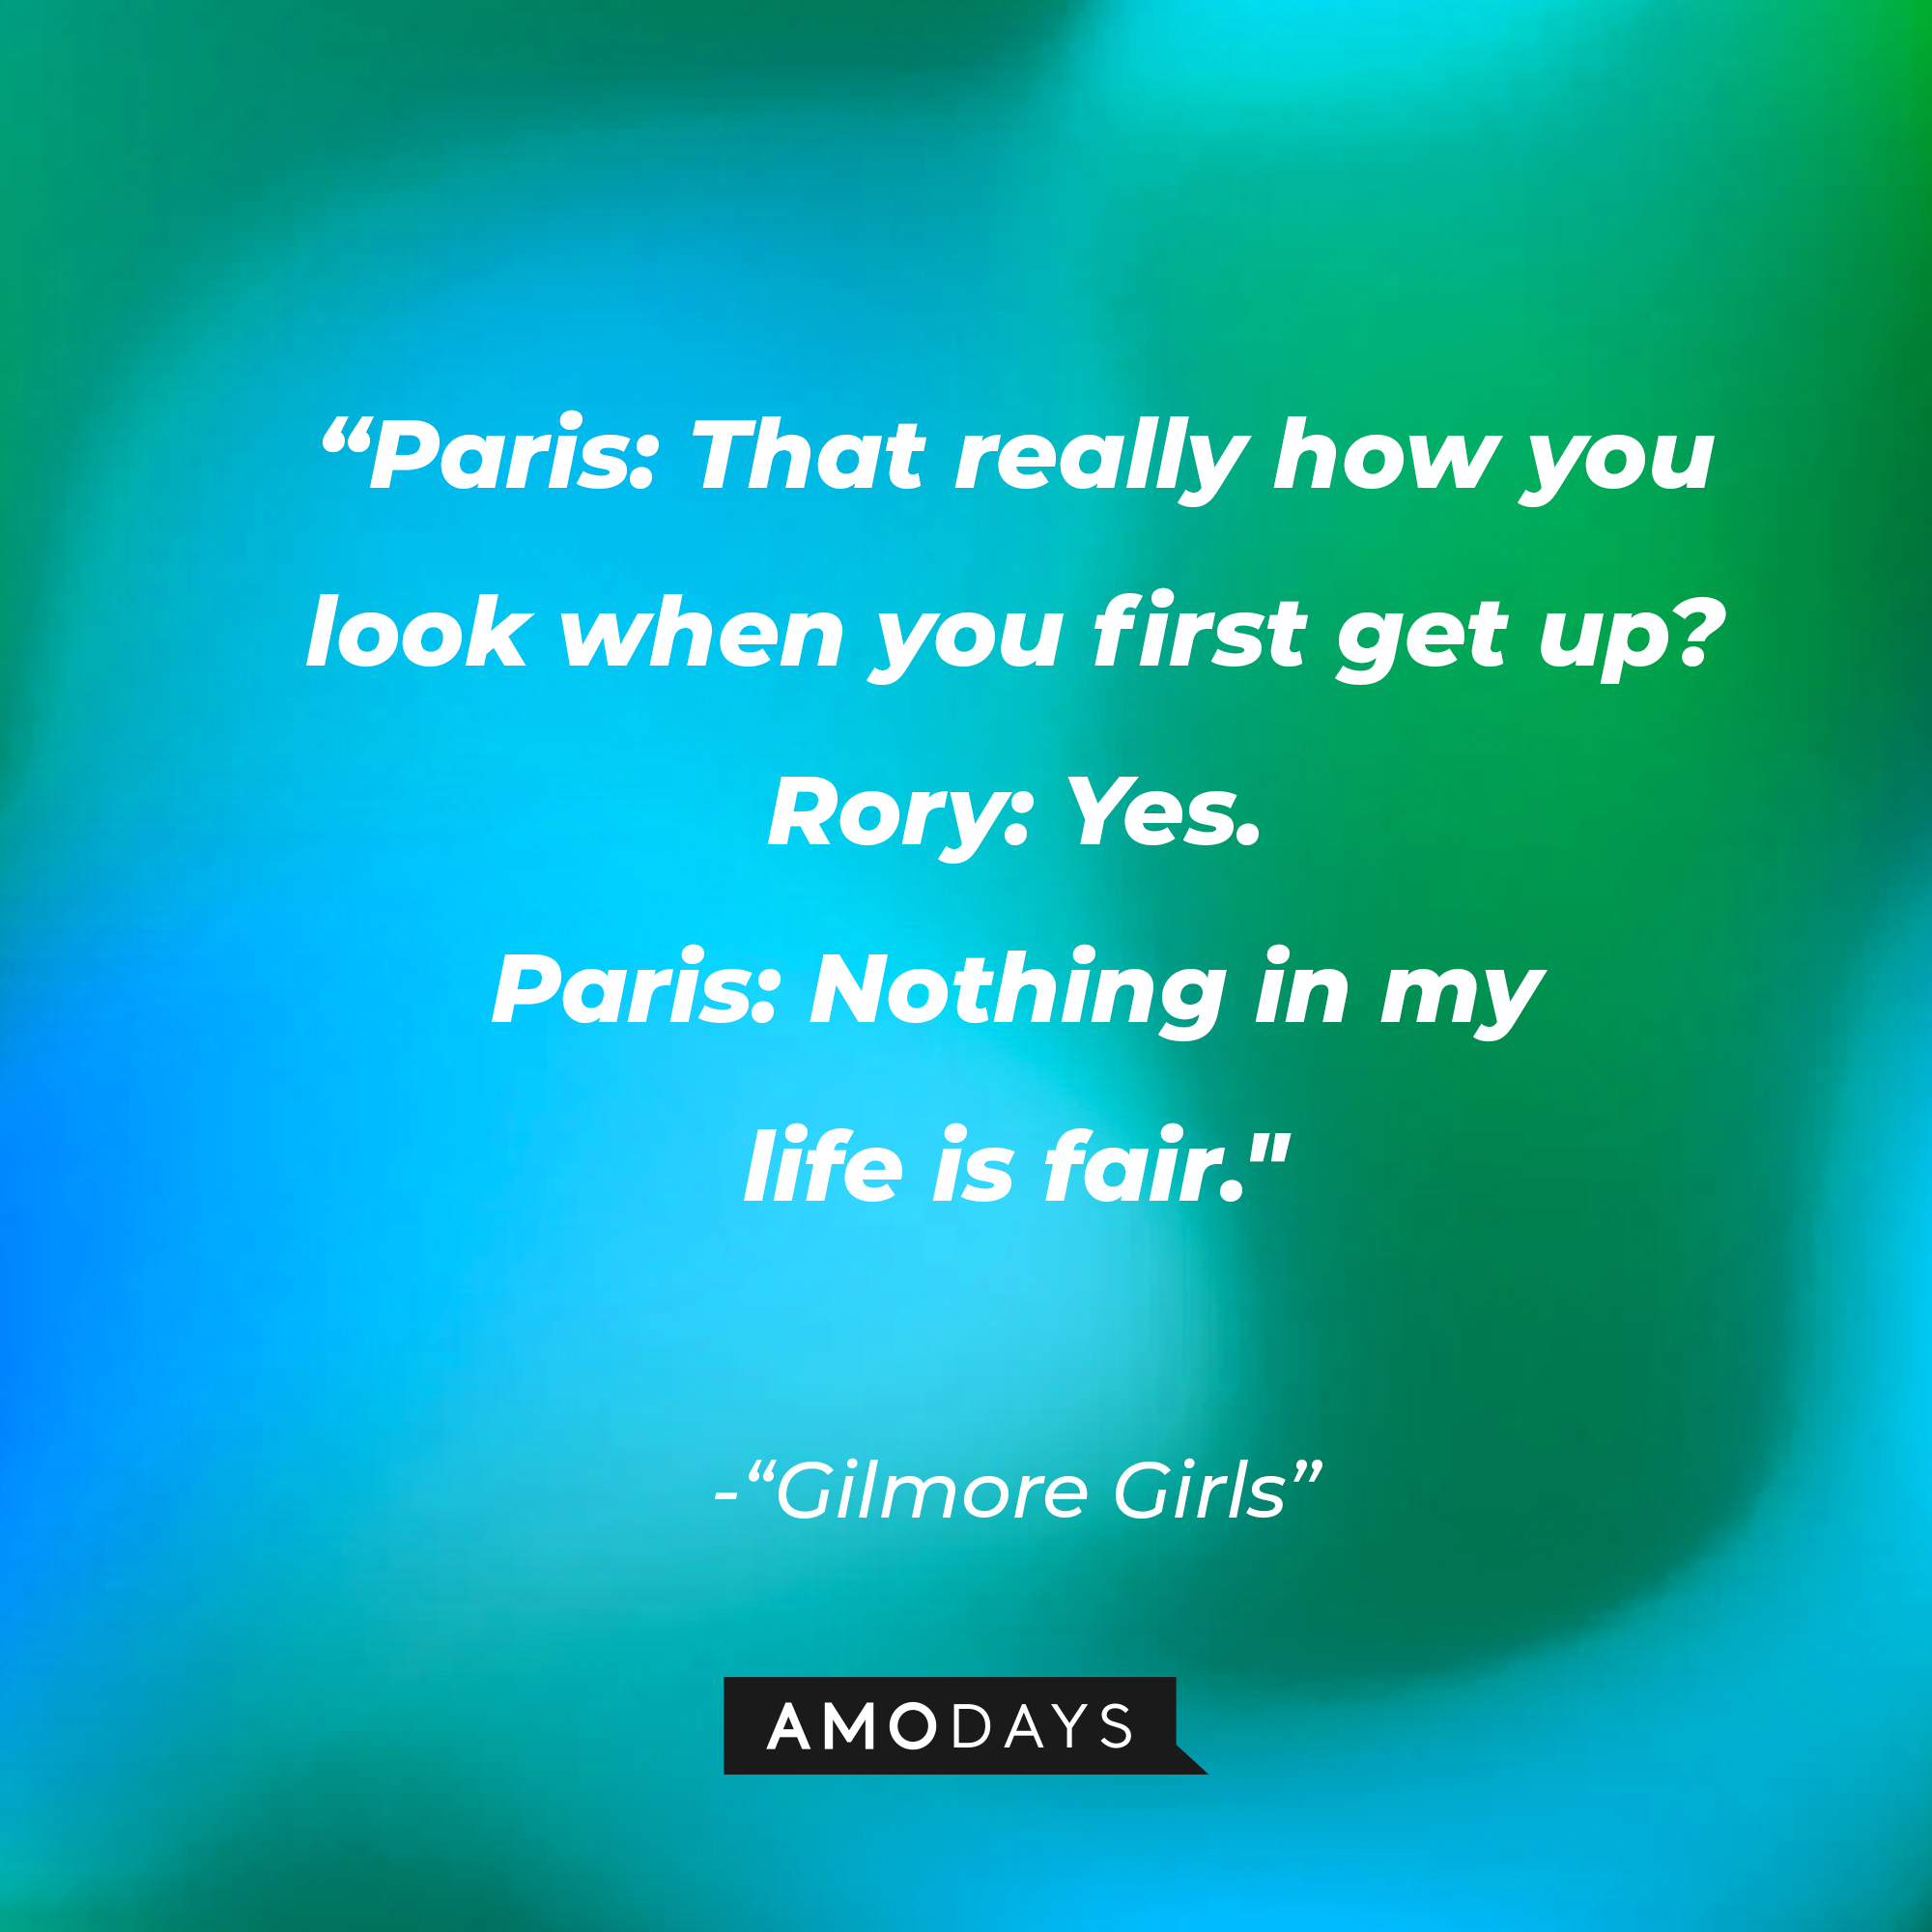 Quote from "Gilmore Girls": “Paris: That really how you look when you first get up? Rory: Yes. Paris: Nothing in my life is fair.” | Source: AmoDays